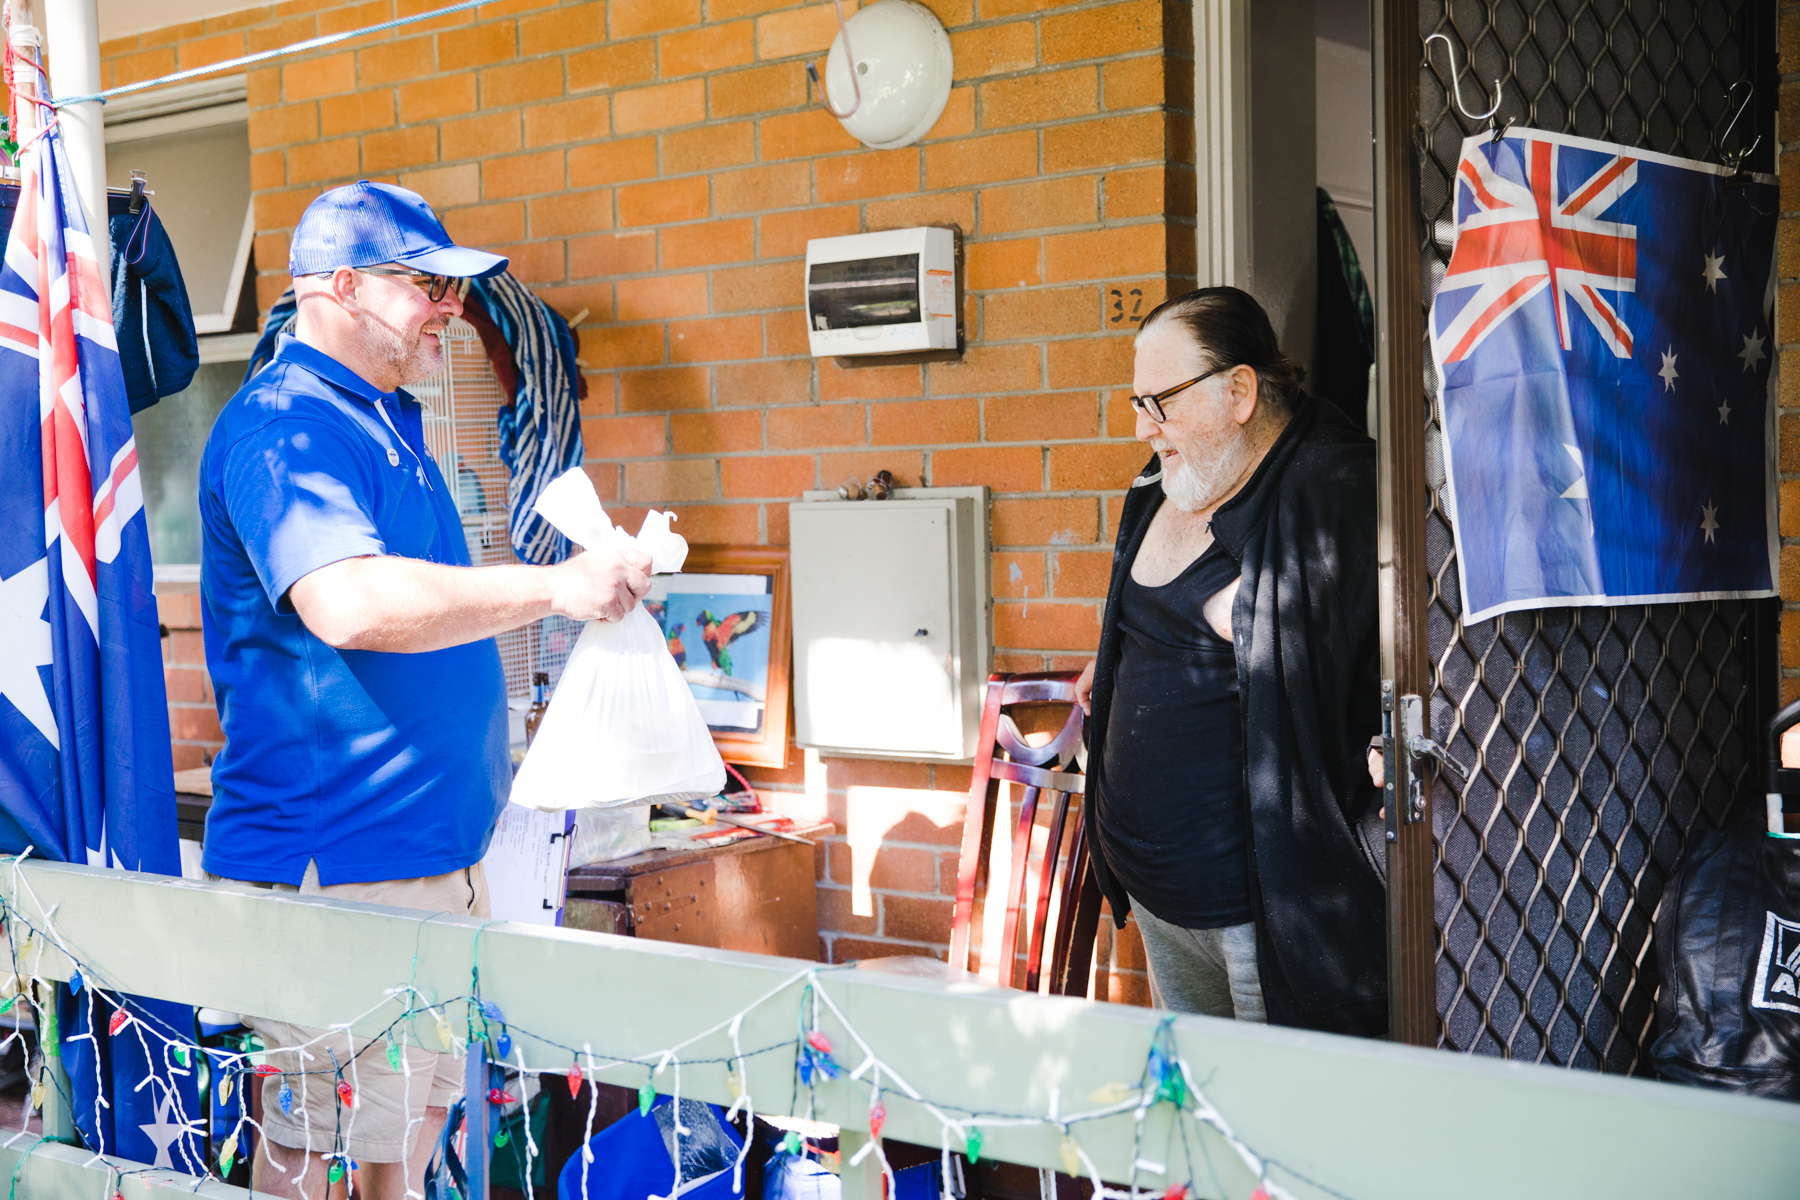 NRMA volunteer staff delivering goods to the vulnerable elderly and selfisolating